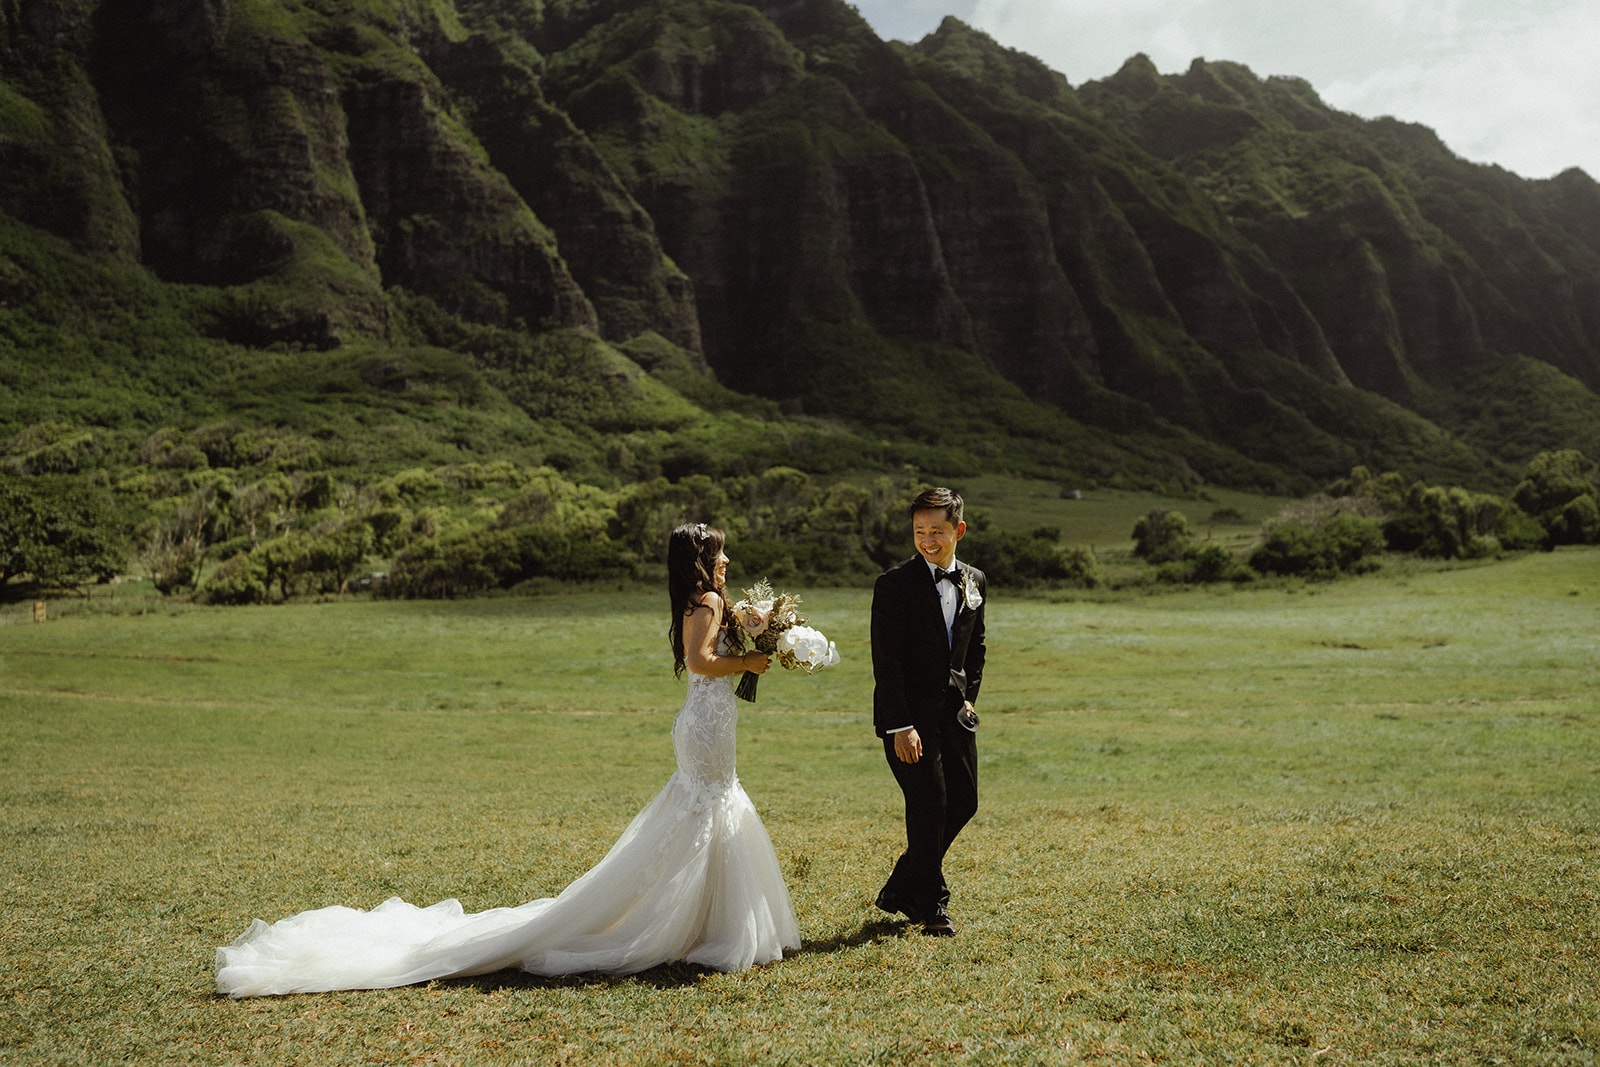 First look with the Bride and Groom before their wedding at Kualoa Ranch Hawaii